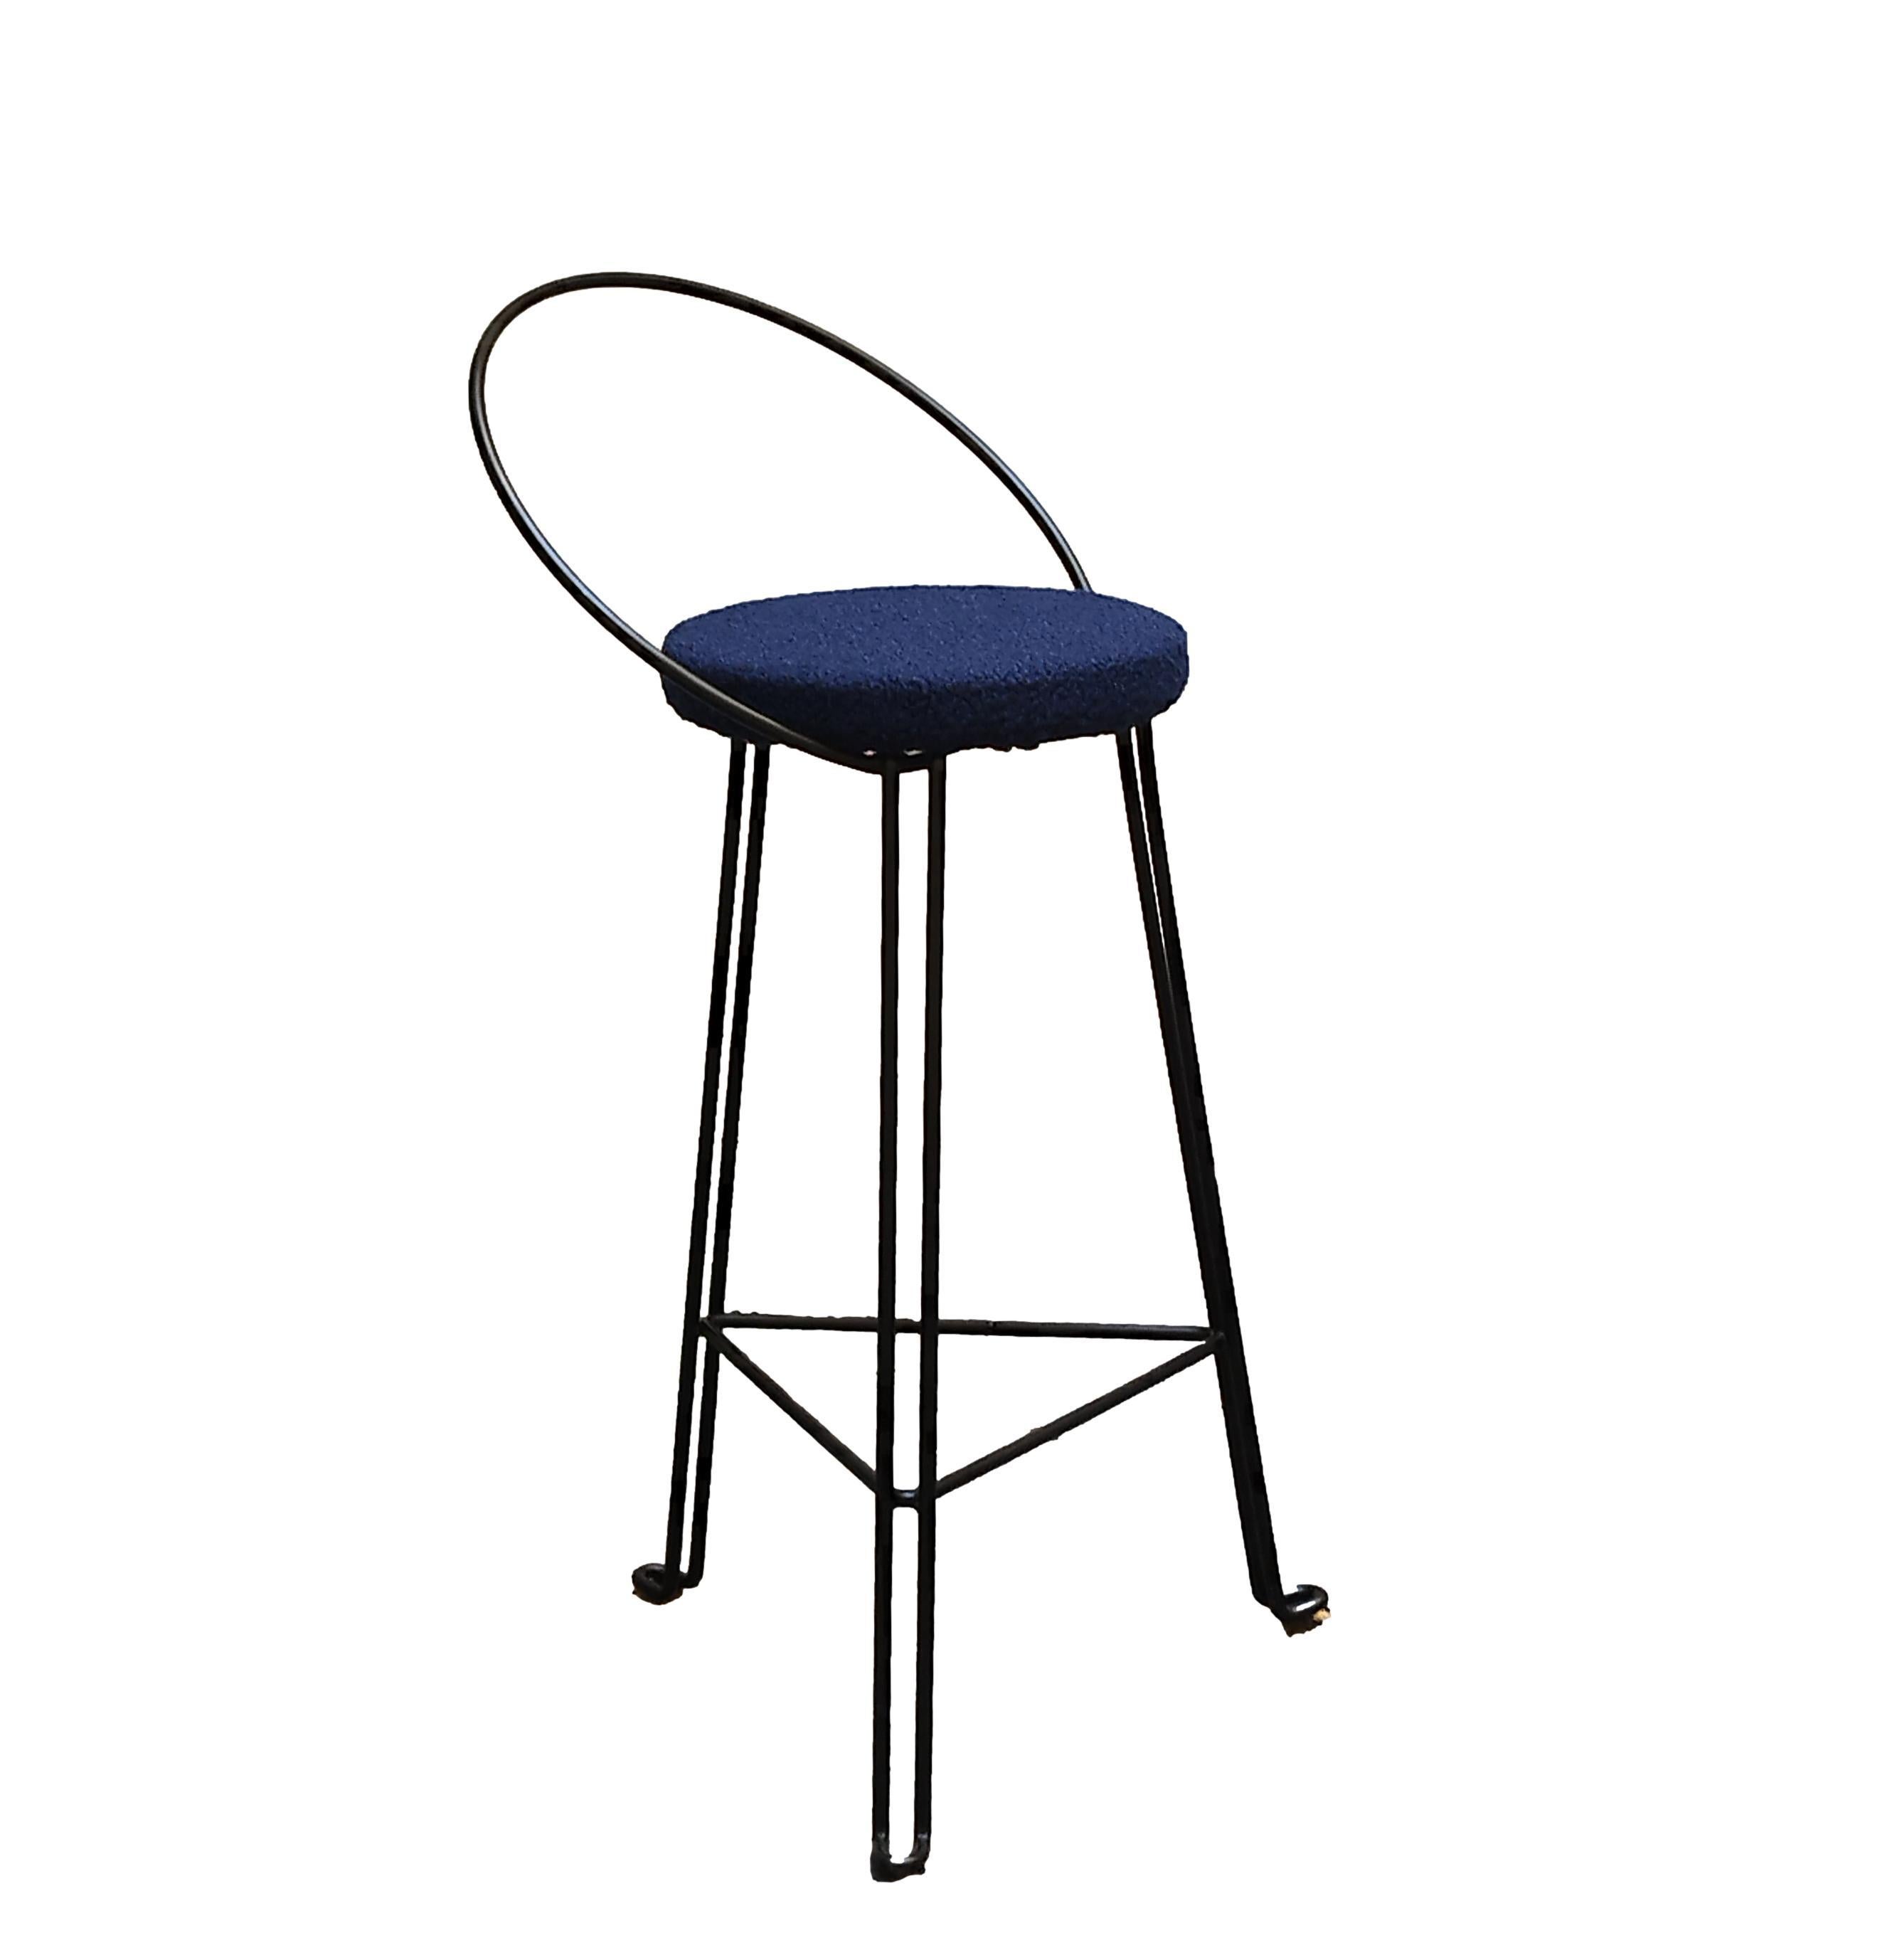 Italian Tomado Style Black Metal Stool with Round Backrest, Italy 1970s For Sale